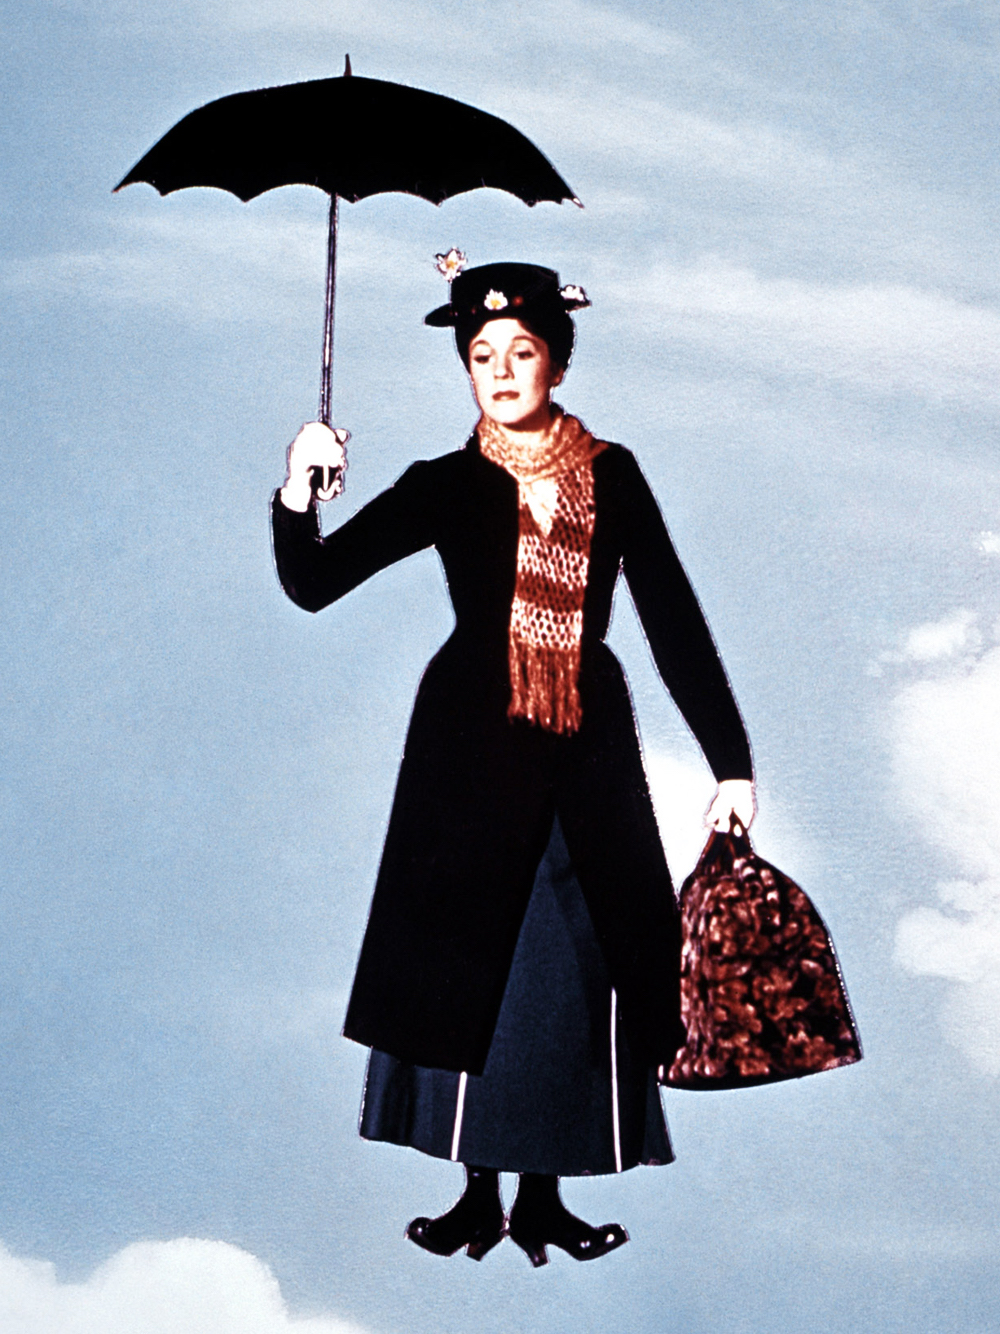 How Does Emily Blunt’s Mary Poppins Compare To The Original?